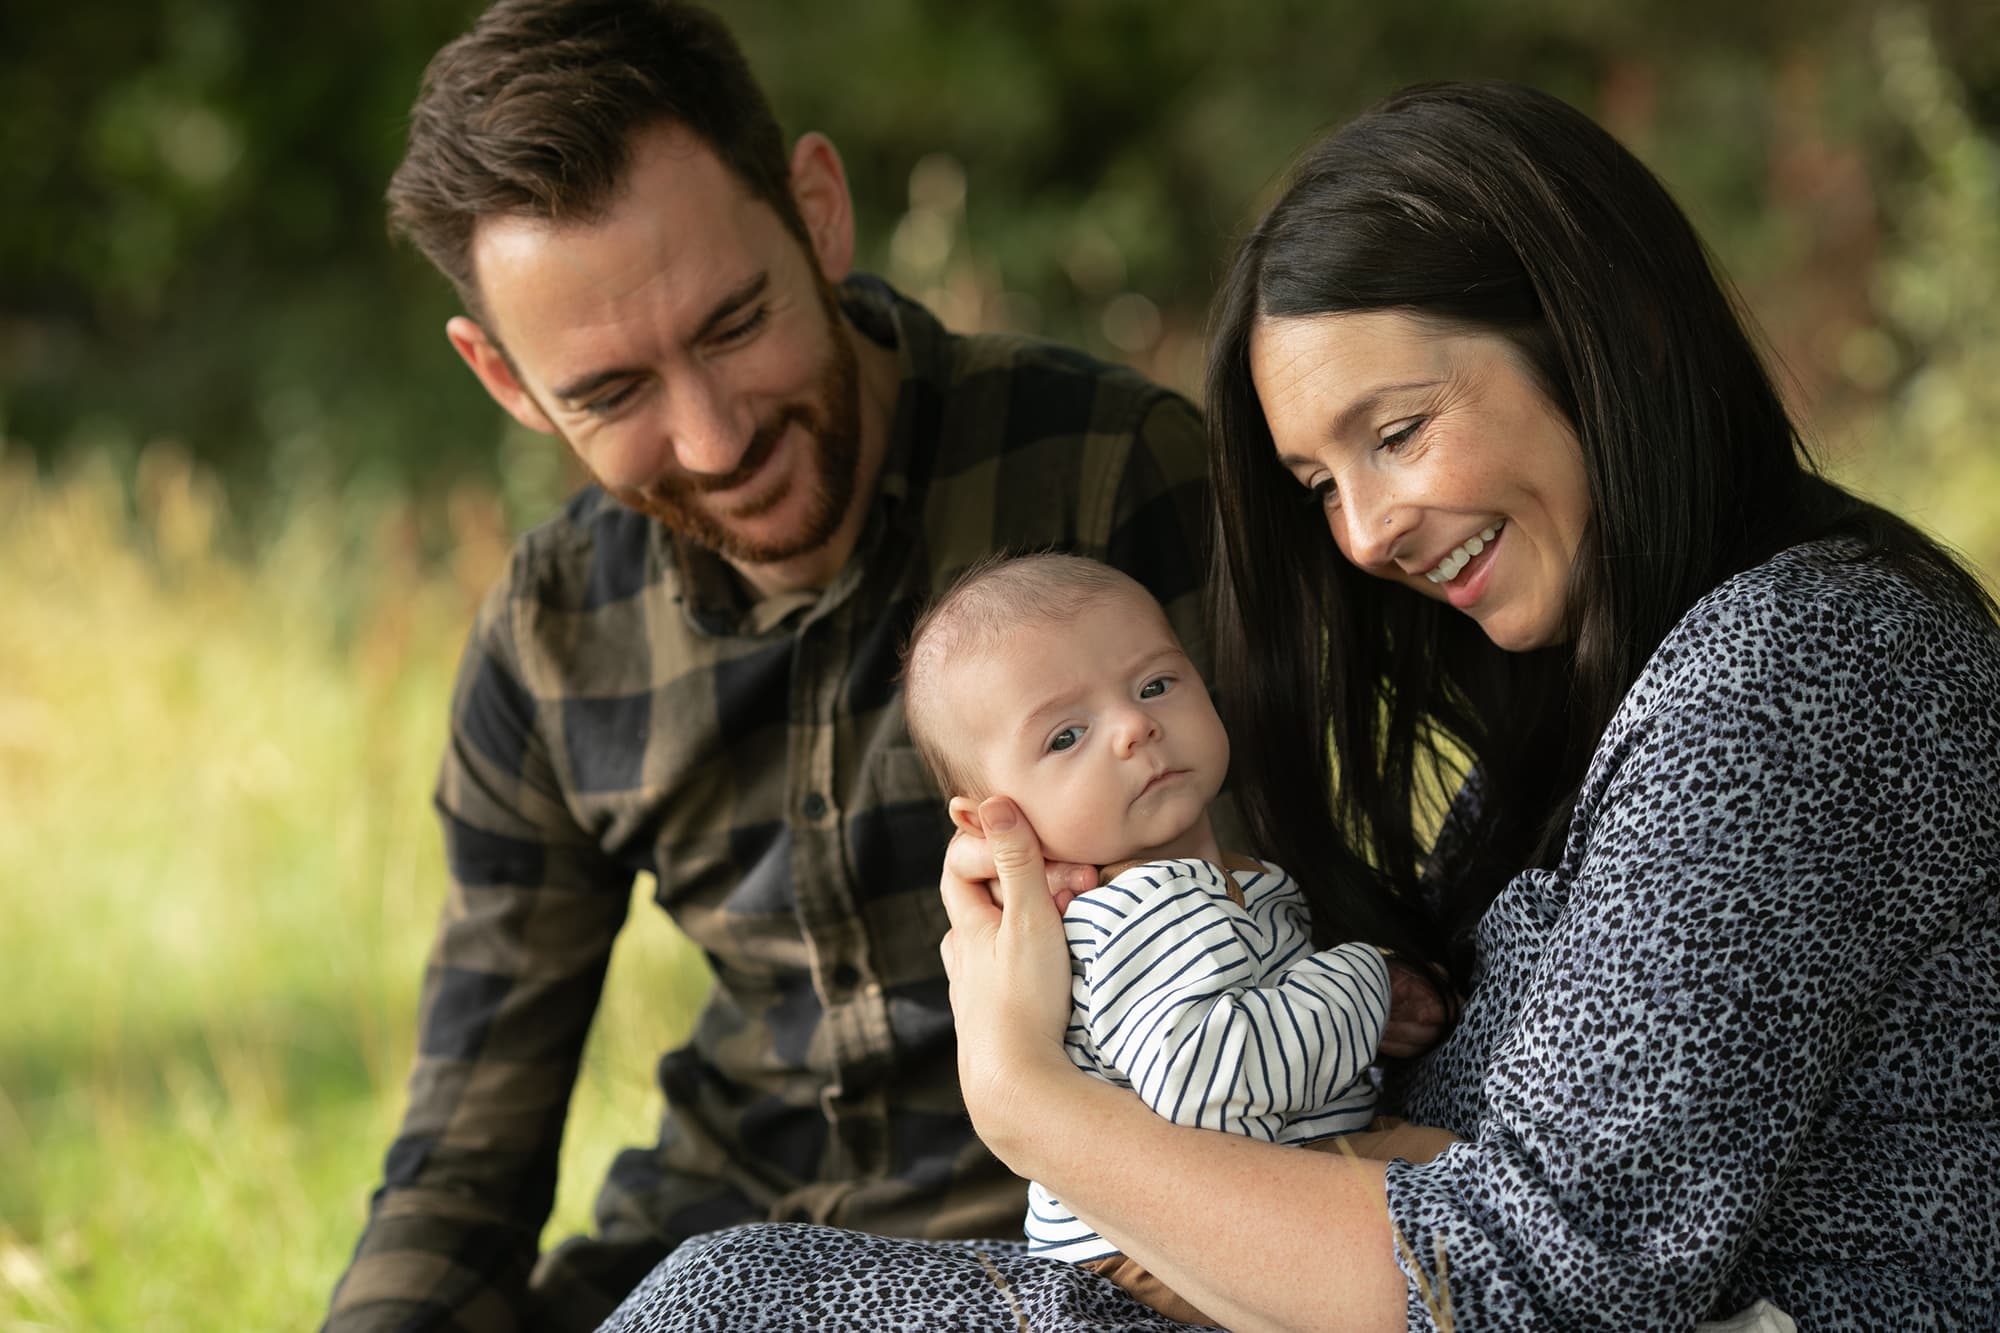 Mum & dad sat with baby in long grass. Image captured by Glasgow photographer during family photography session